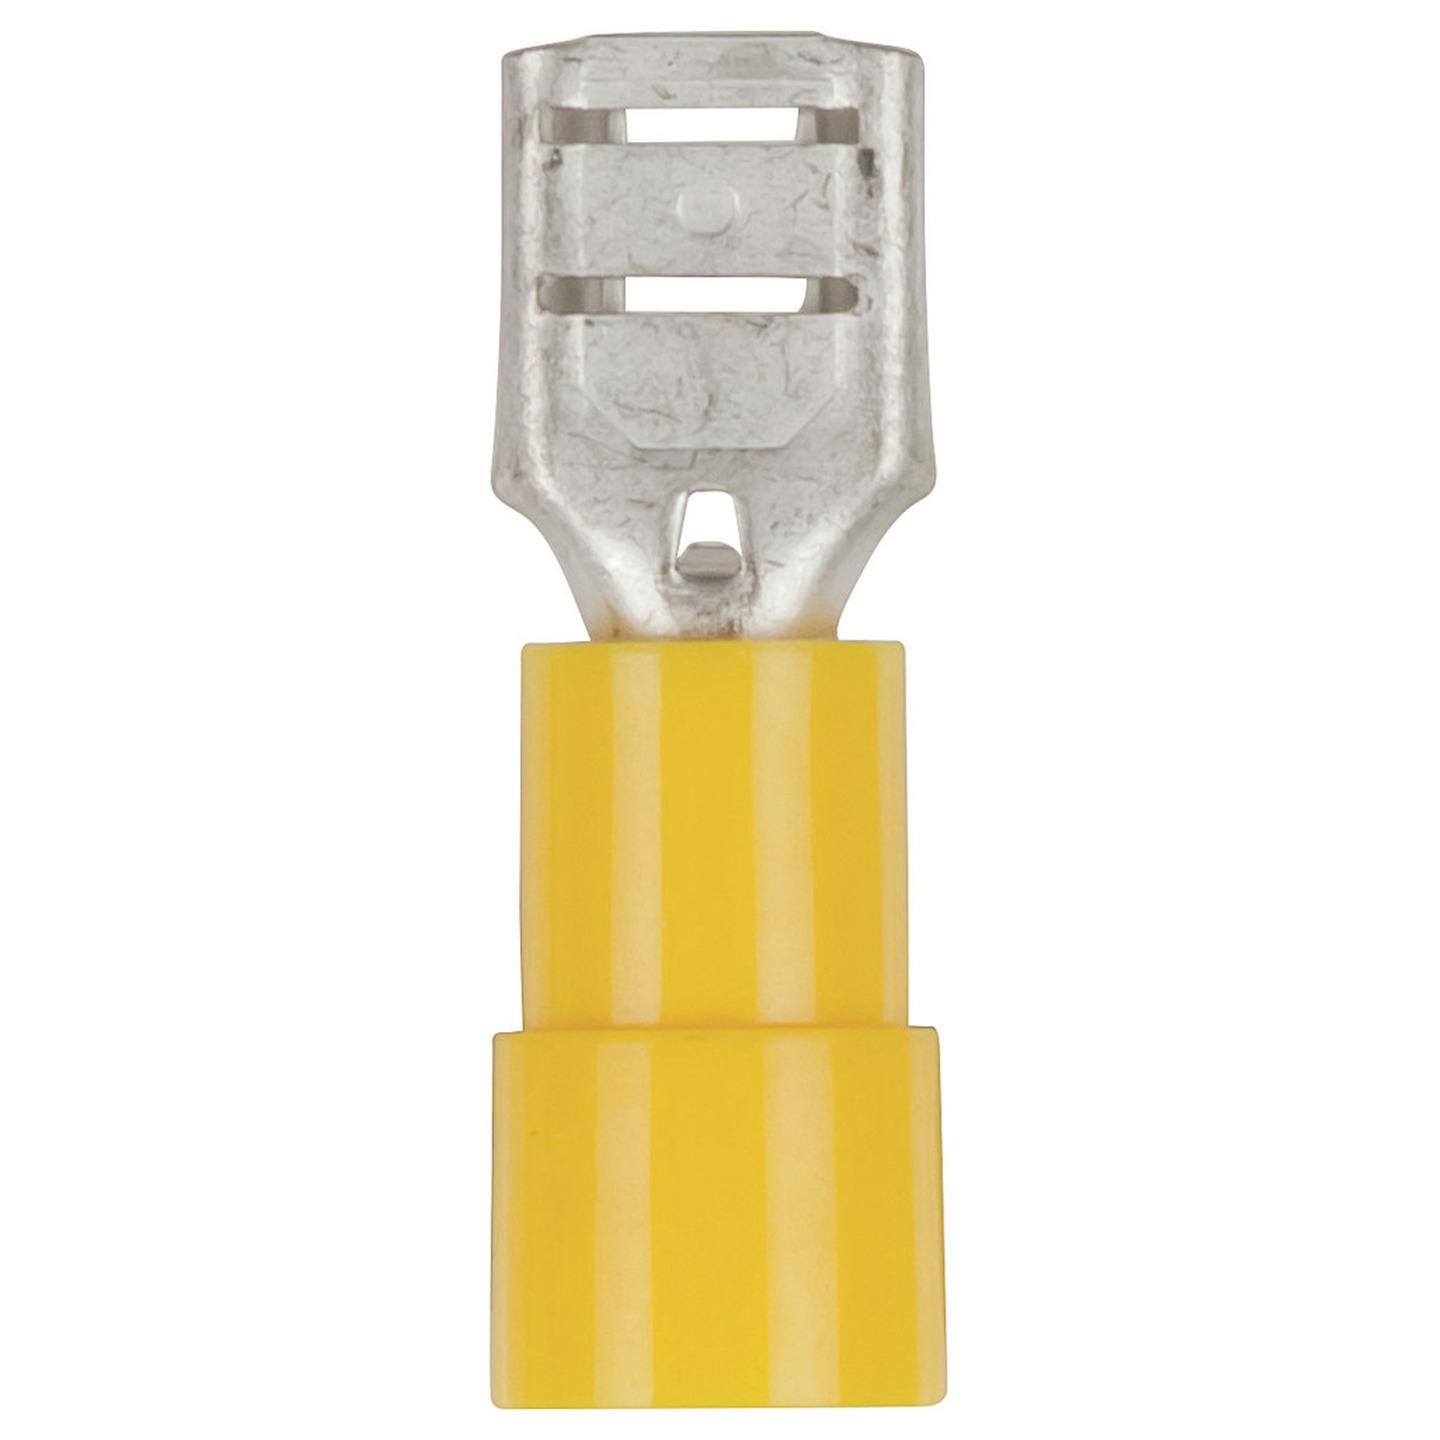 Female Spade - Yellow - Pack of 8